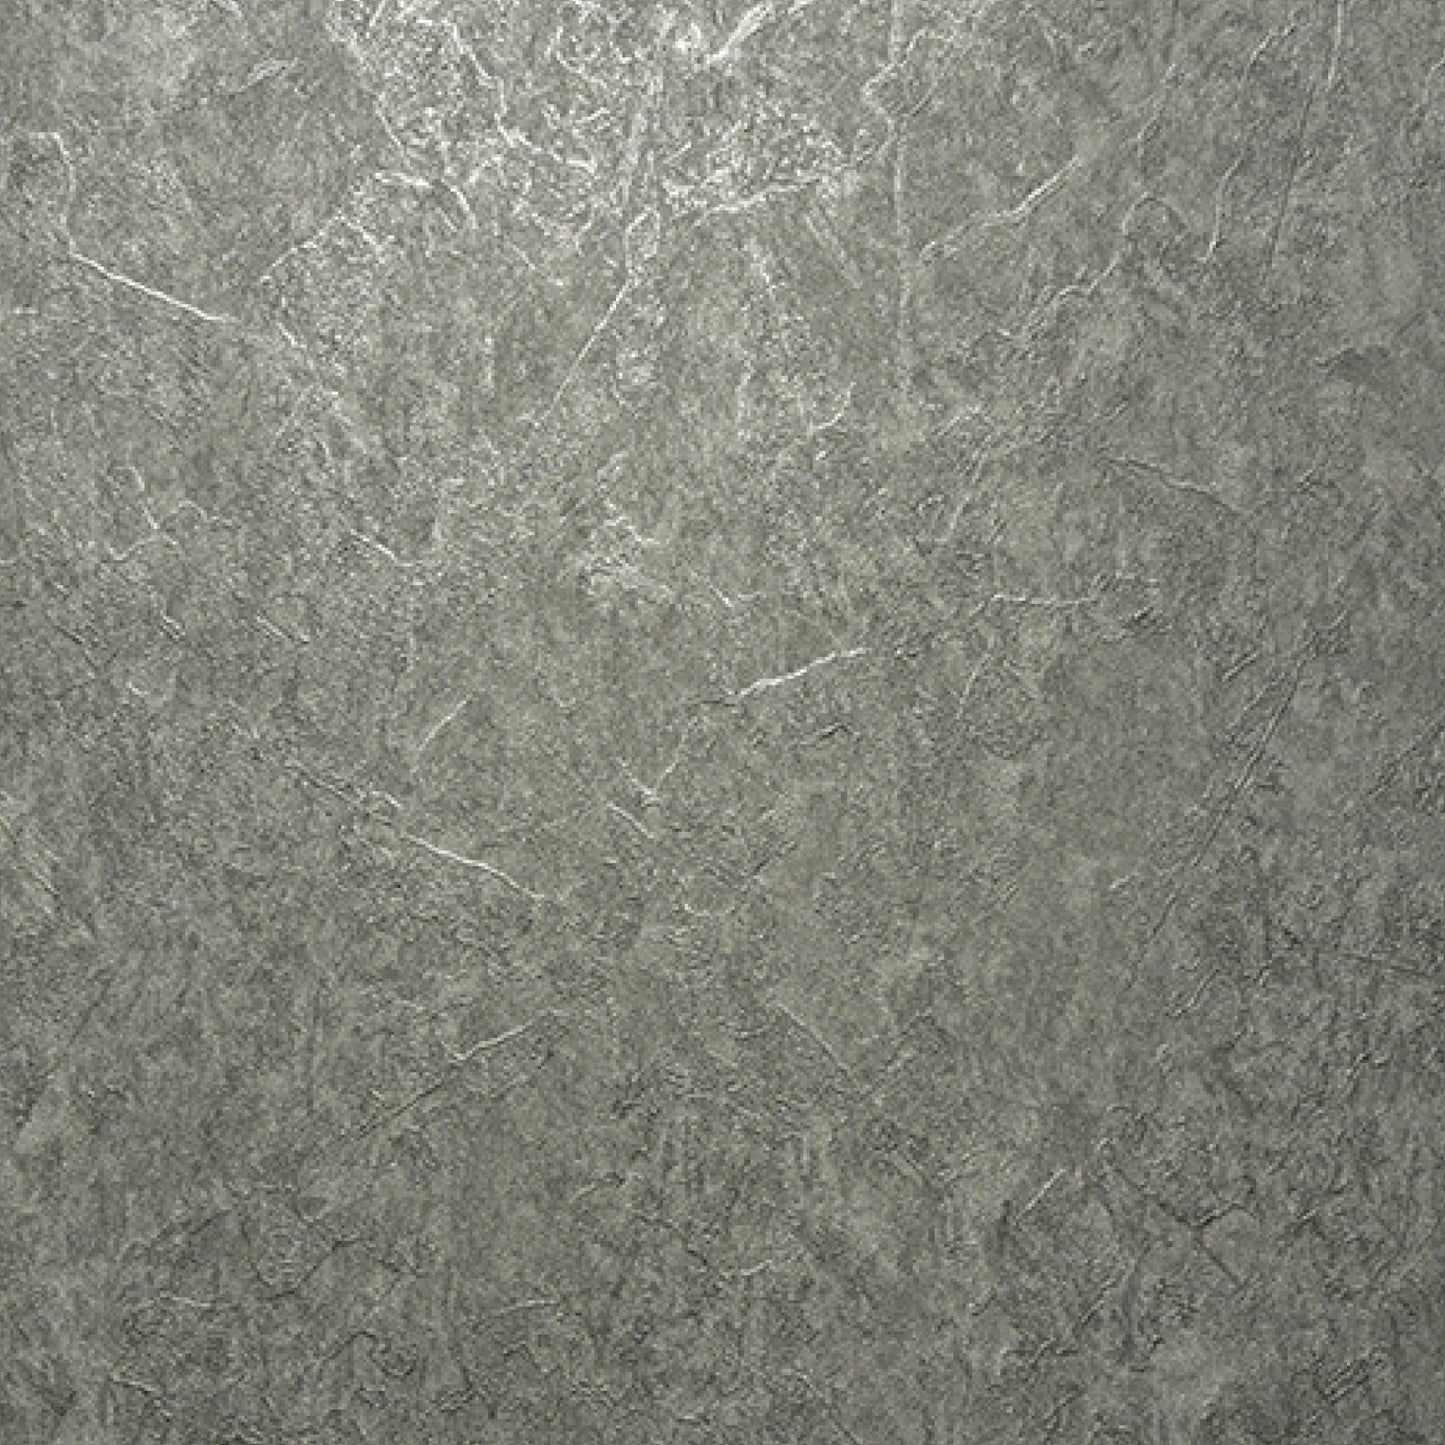 Chic Shades of Grey Rough Stucco Wallpaper